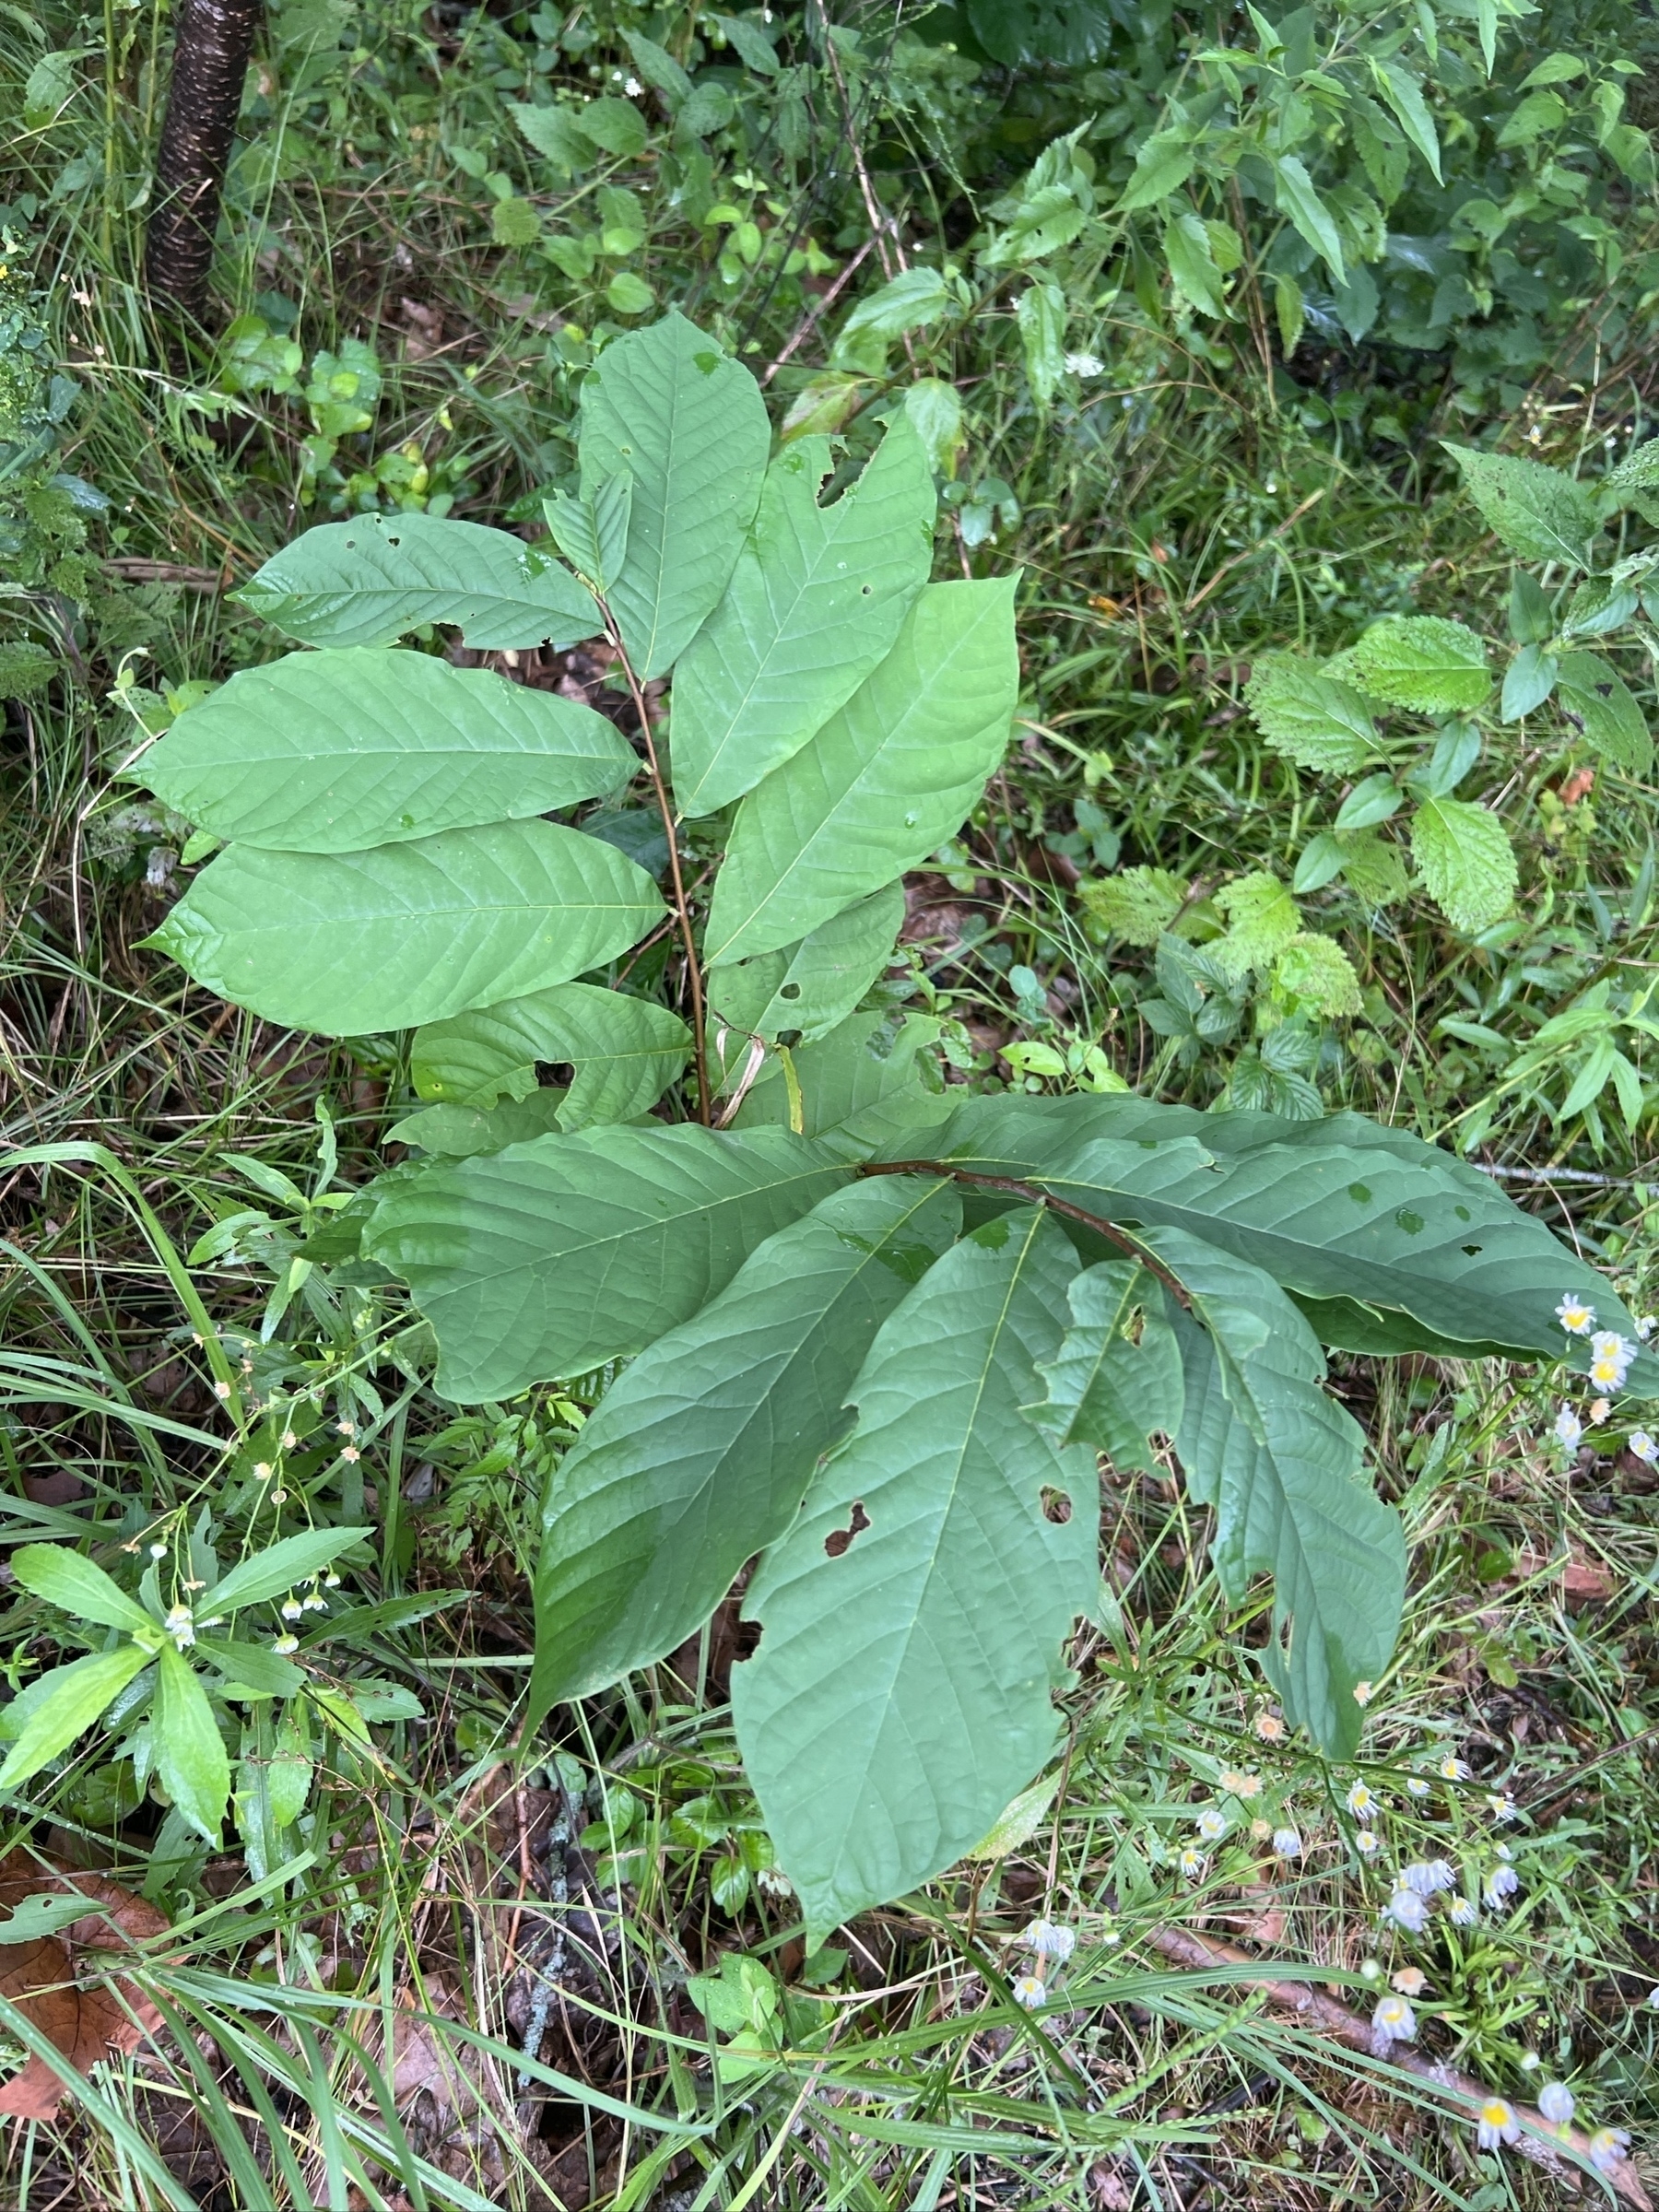 A small tree/shrub about 2 feet high with very large, dark green leaves. The leaves are smooth, elongated coming to a point at the end. Leaves are each 2-4